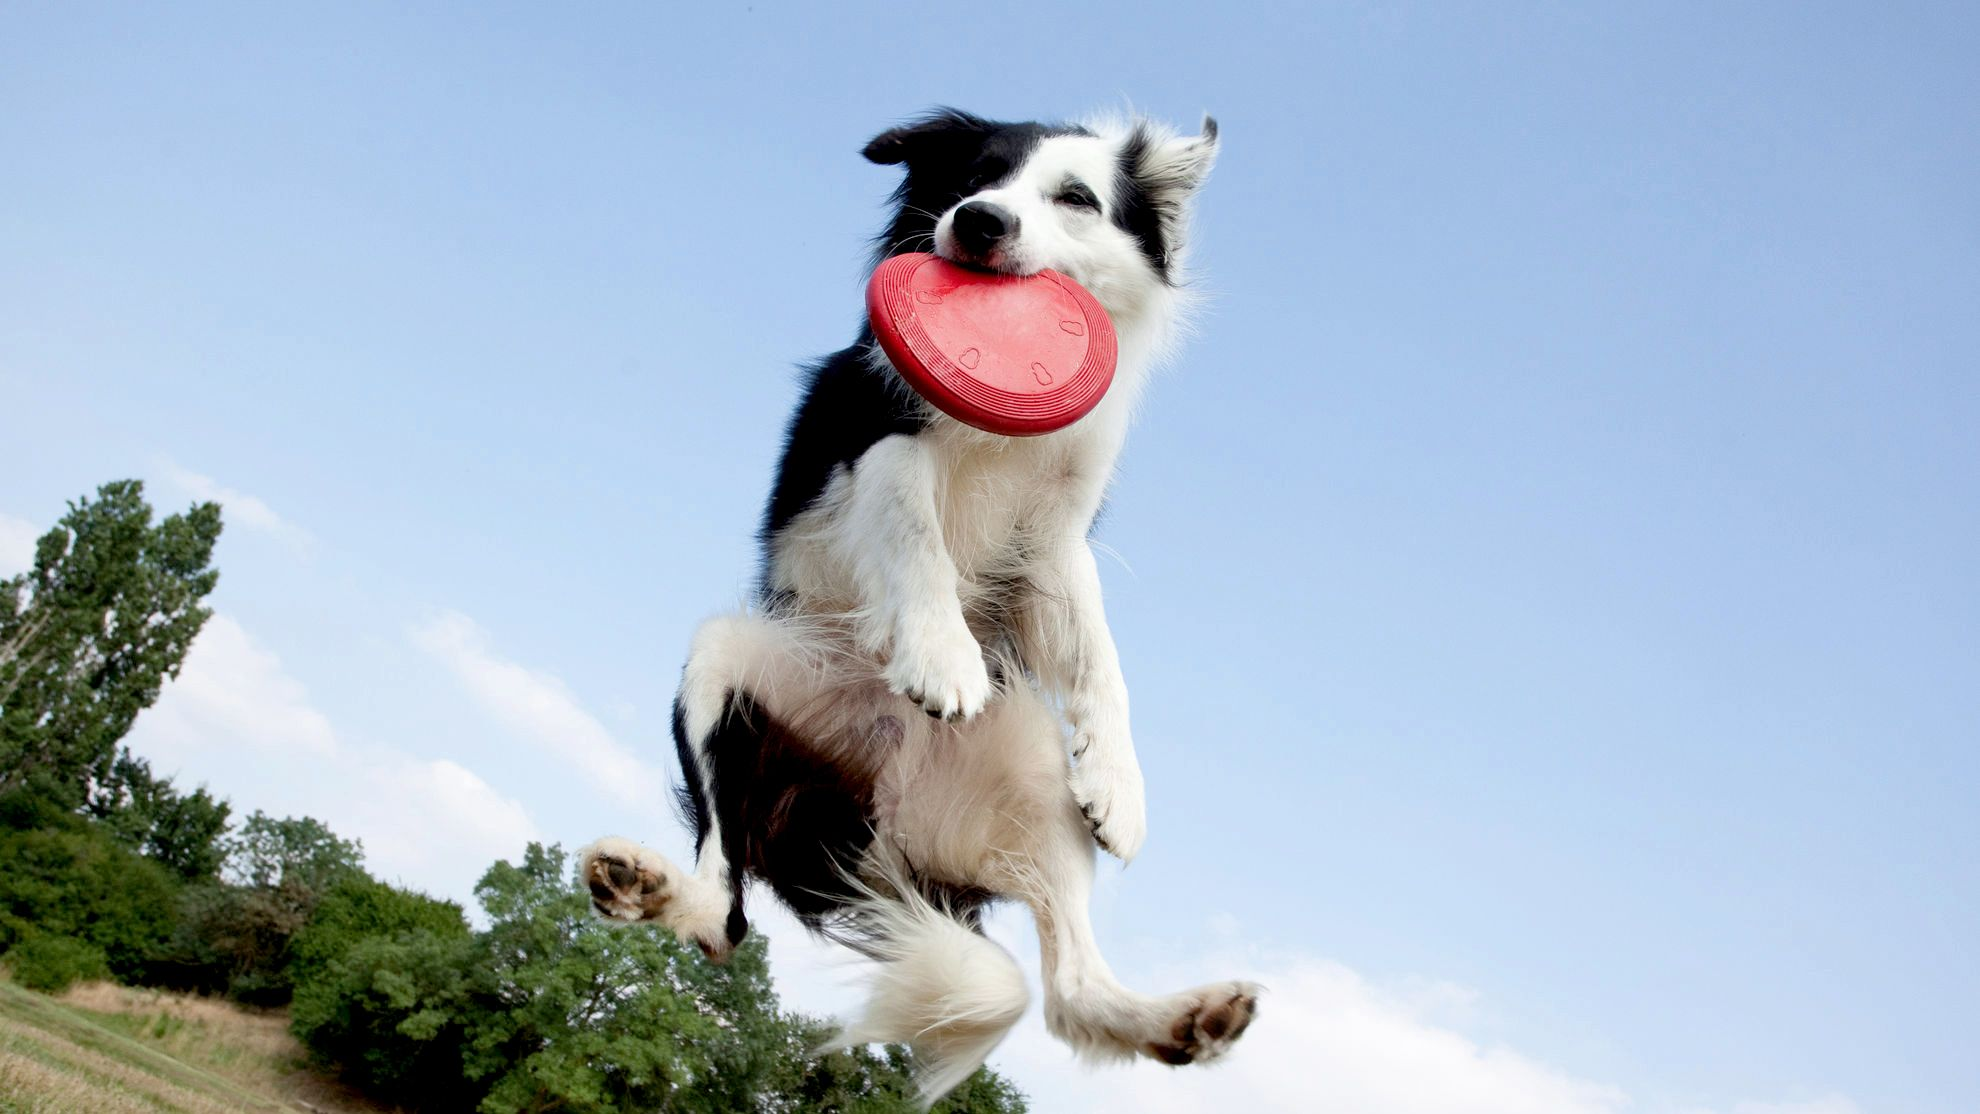 Border Collie caught mid-air with red frisbee in mouth